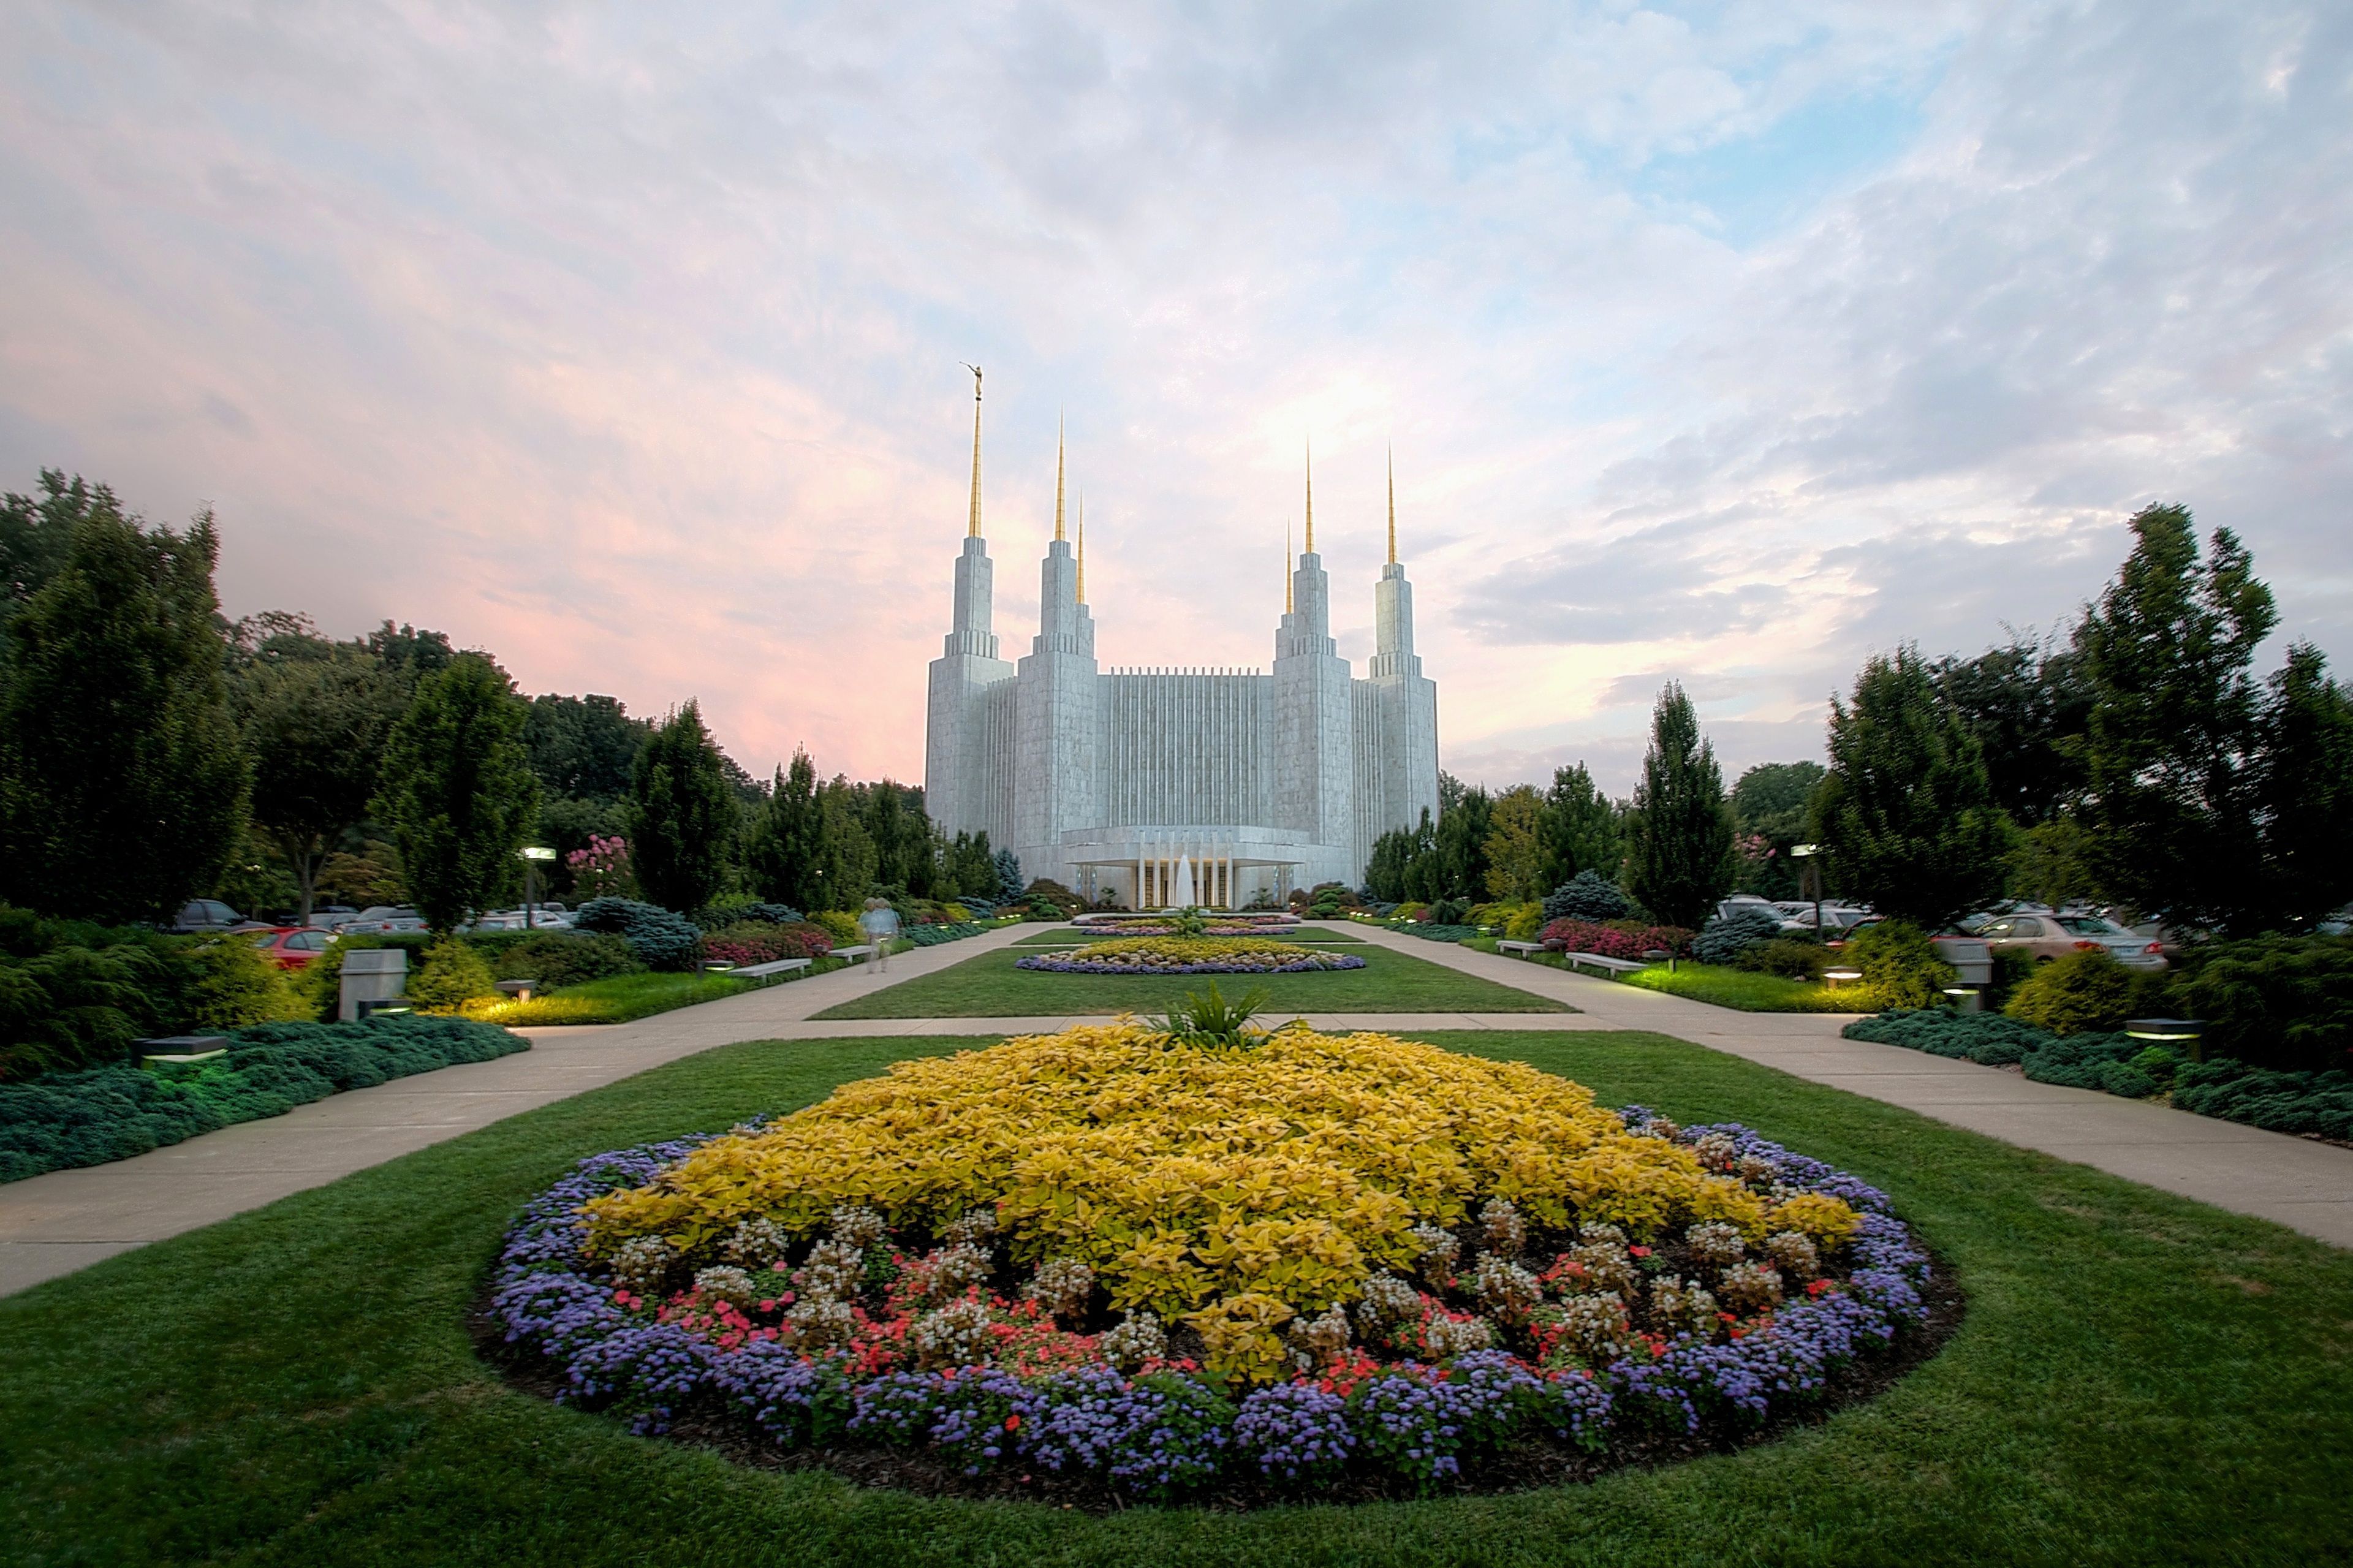 The Washington D.C. Temple entrance, with scenery.